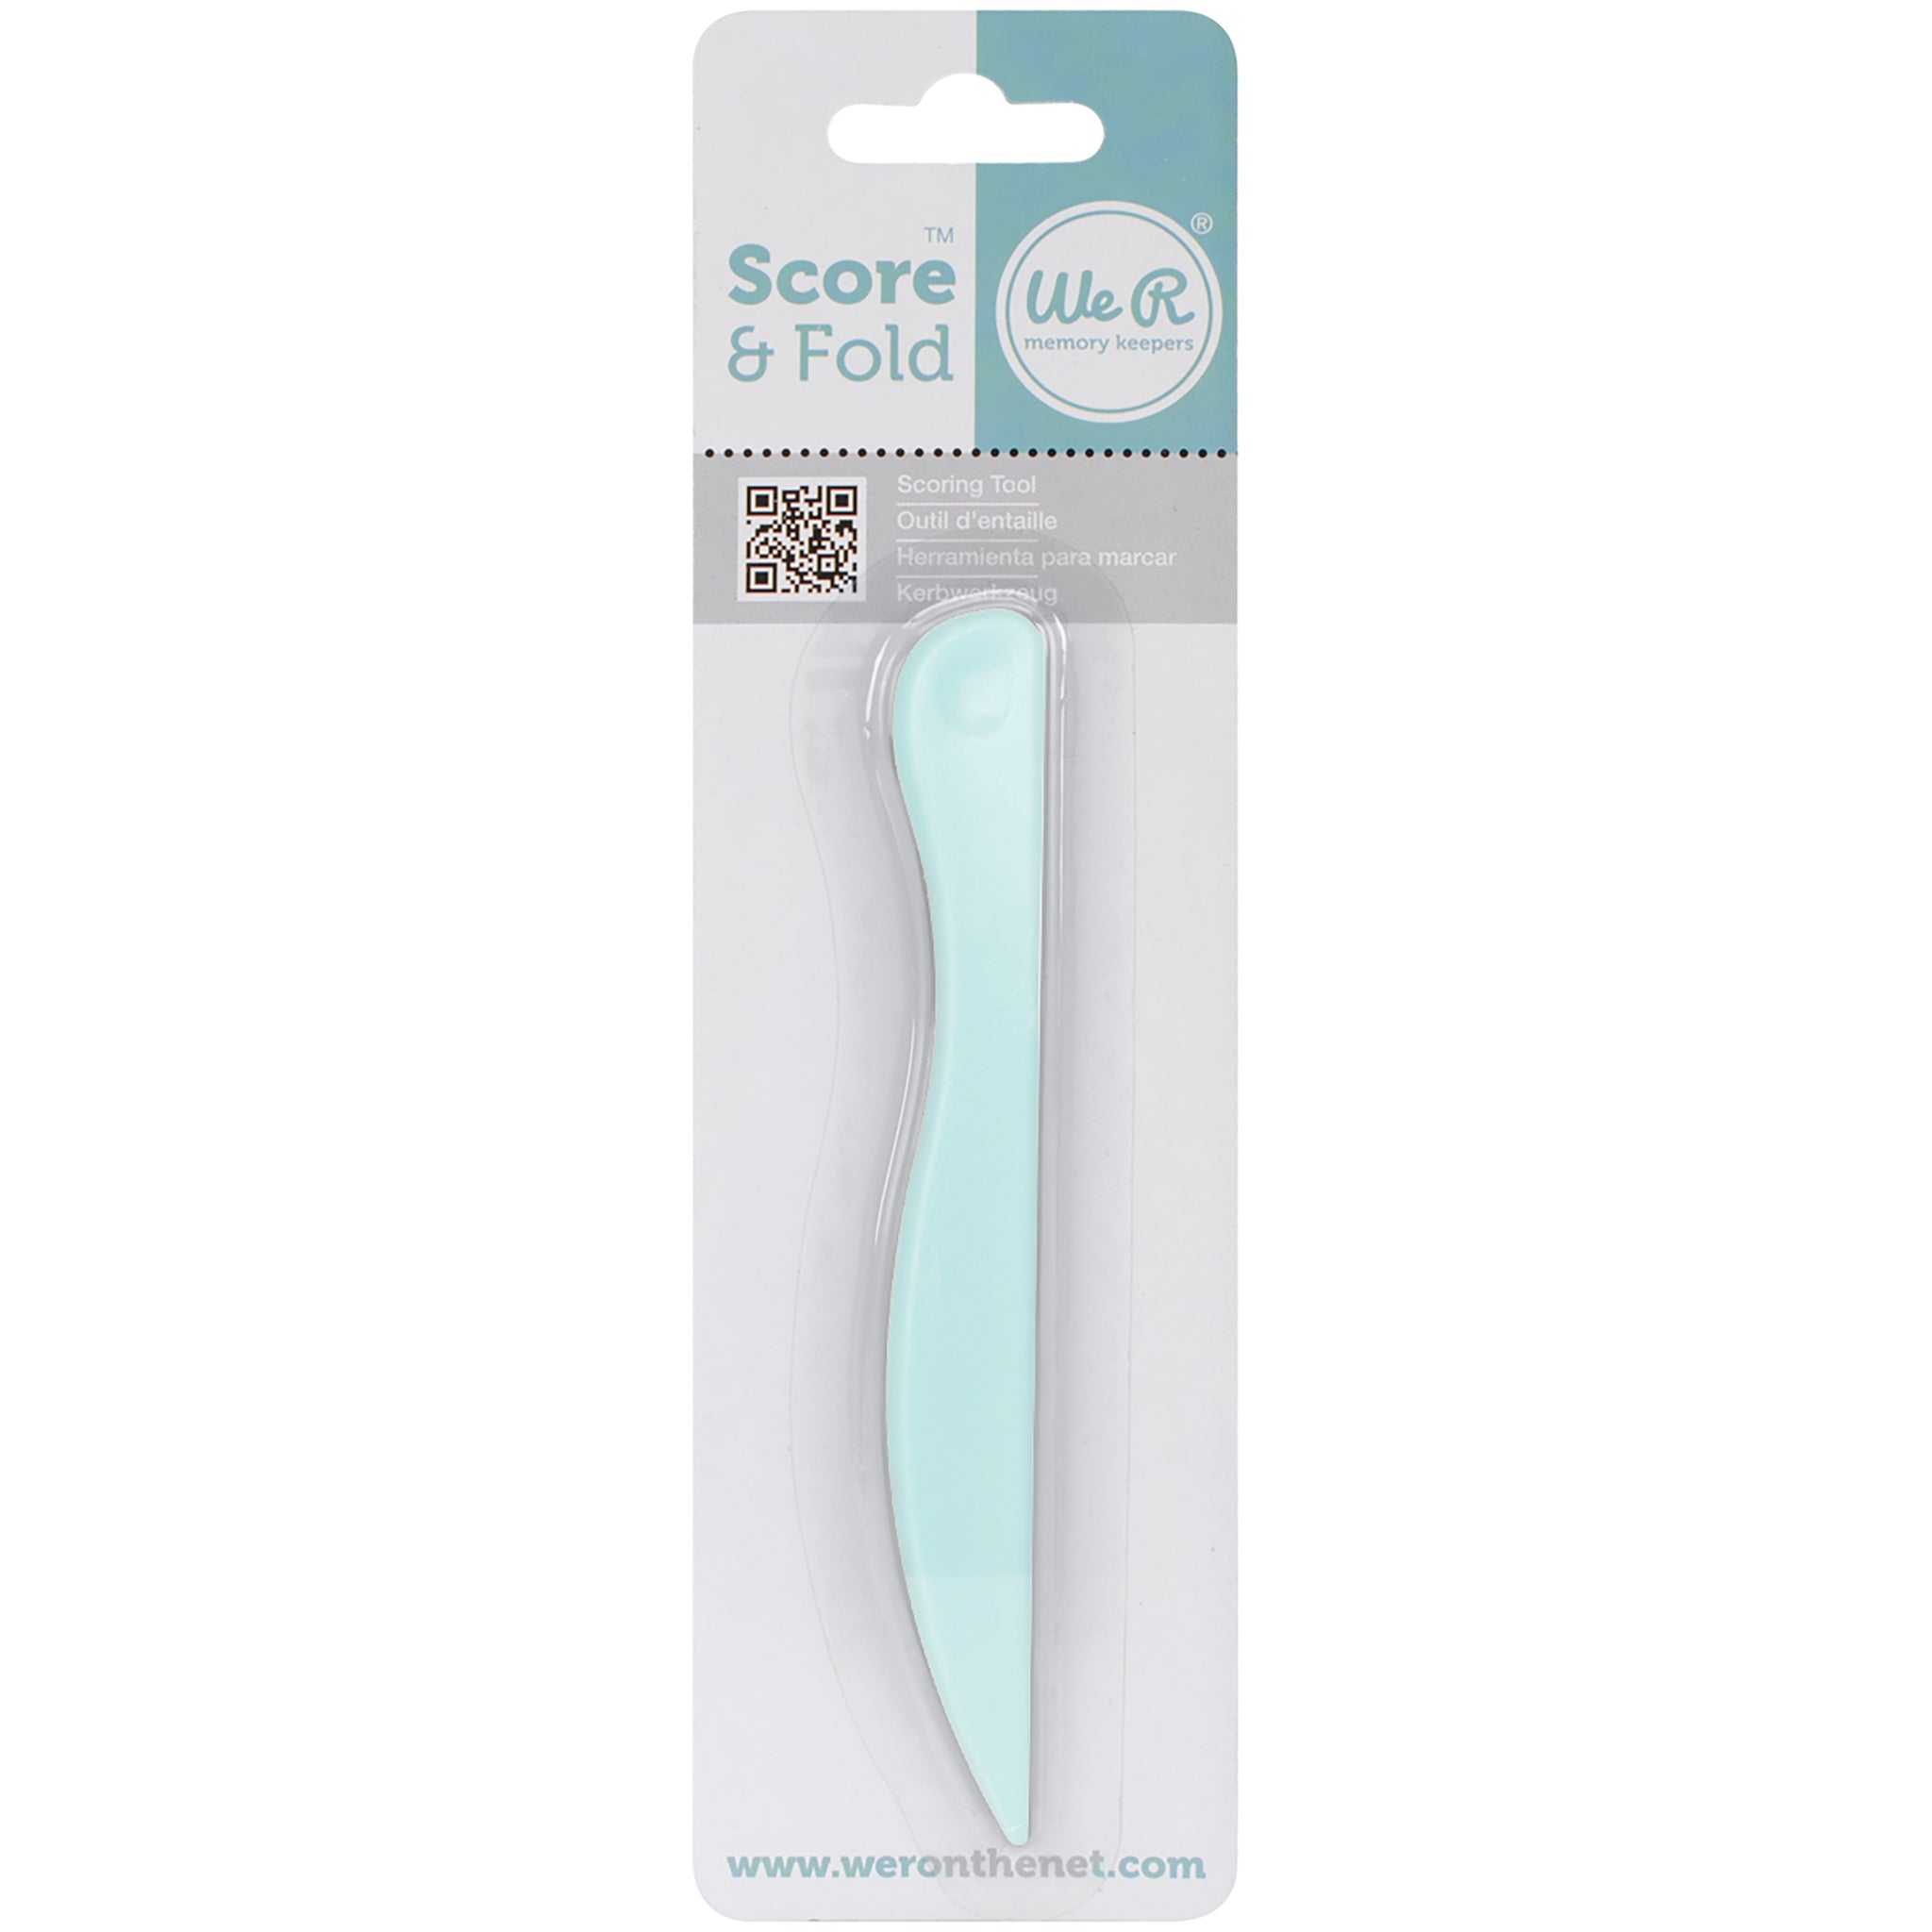 261832 We R Memory Keepers Score & Fold Tool-5.75"